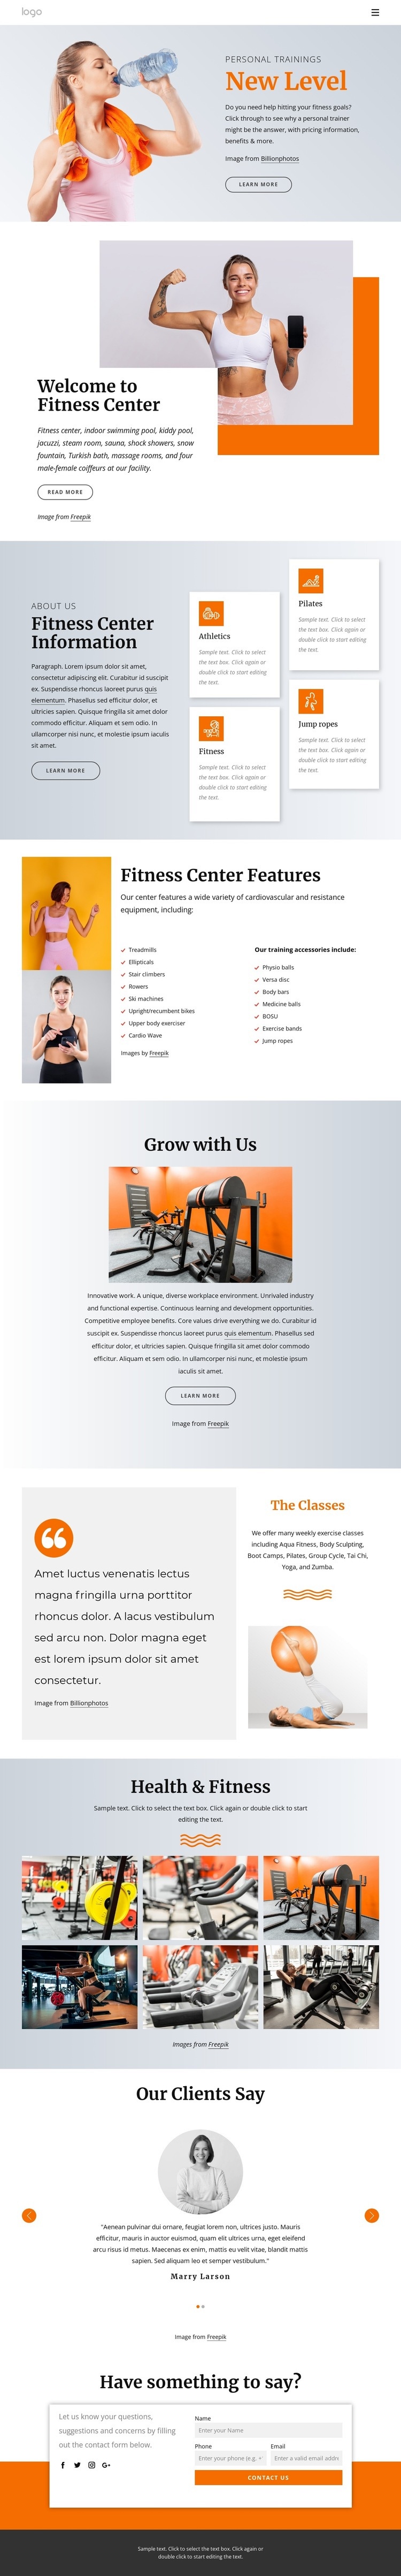 24 hour fitness center Web Page Design